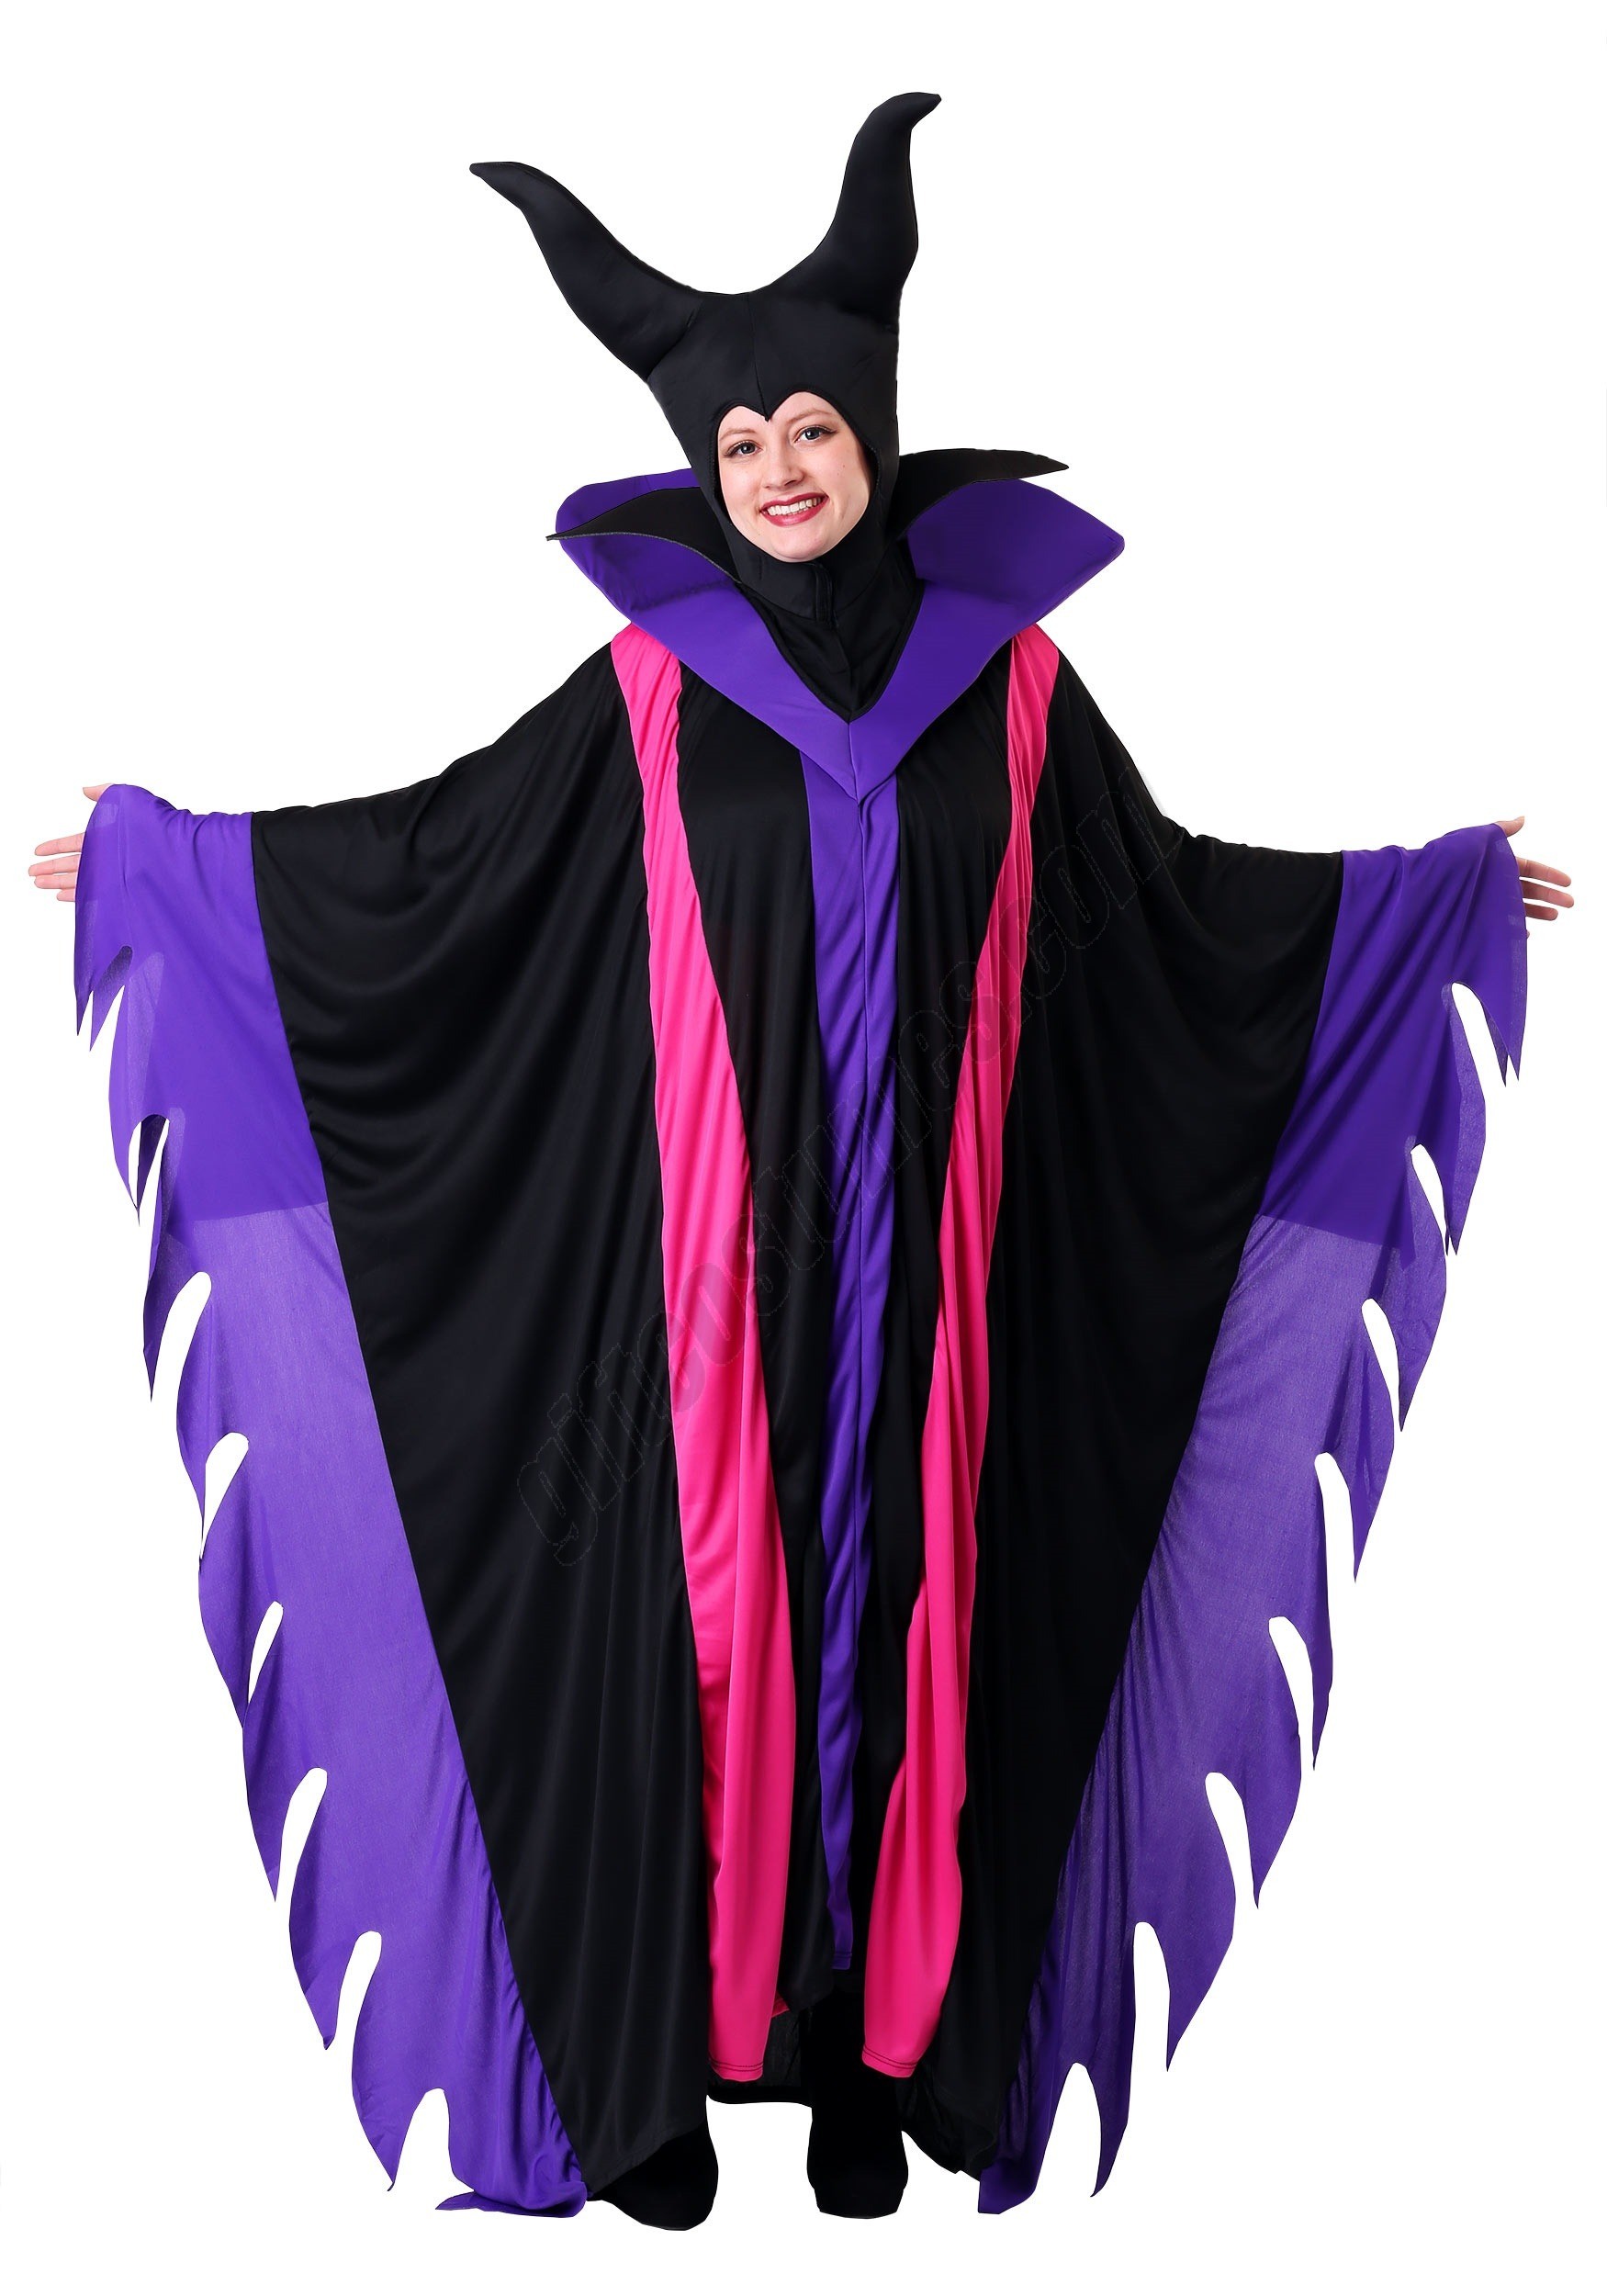 Plus Size Magnificent Witch Costume Promotions - Plus Size Magnificent Witch Costume Promotions